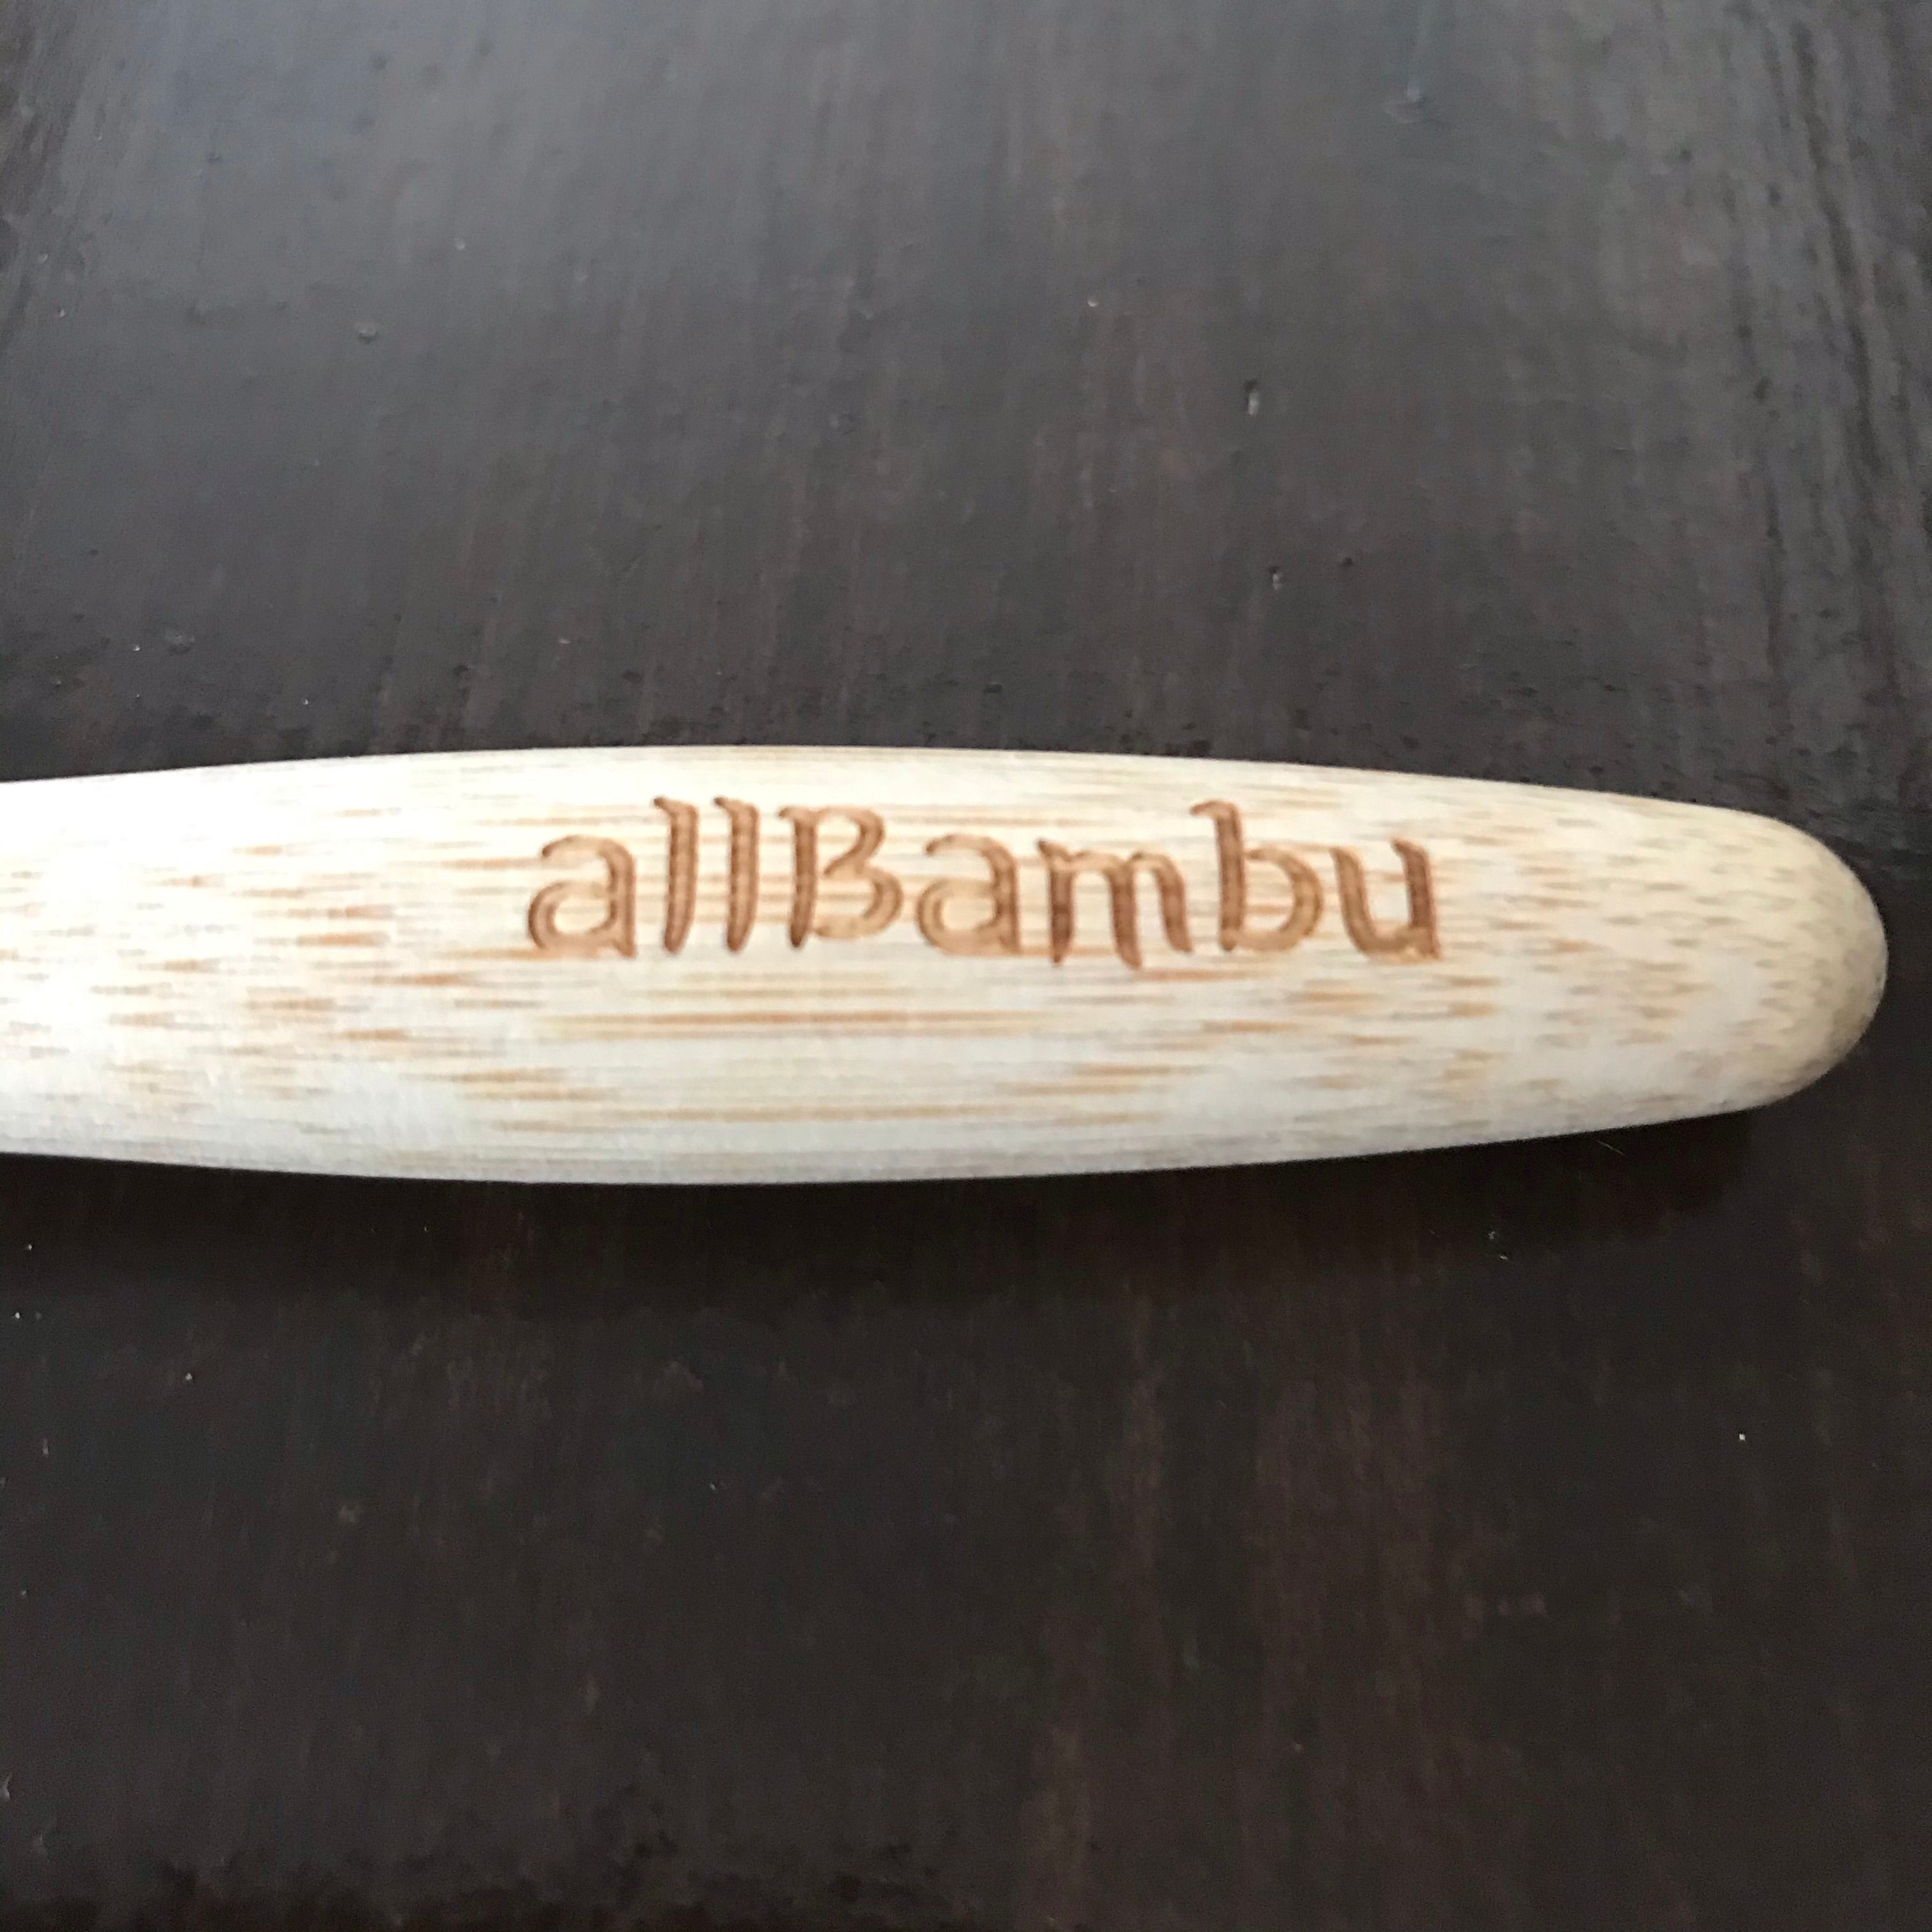 Bamboo Toothbrushes and Accessories